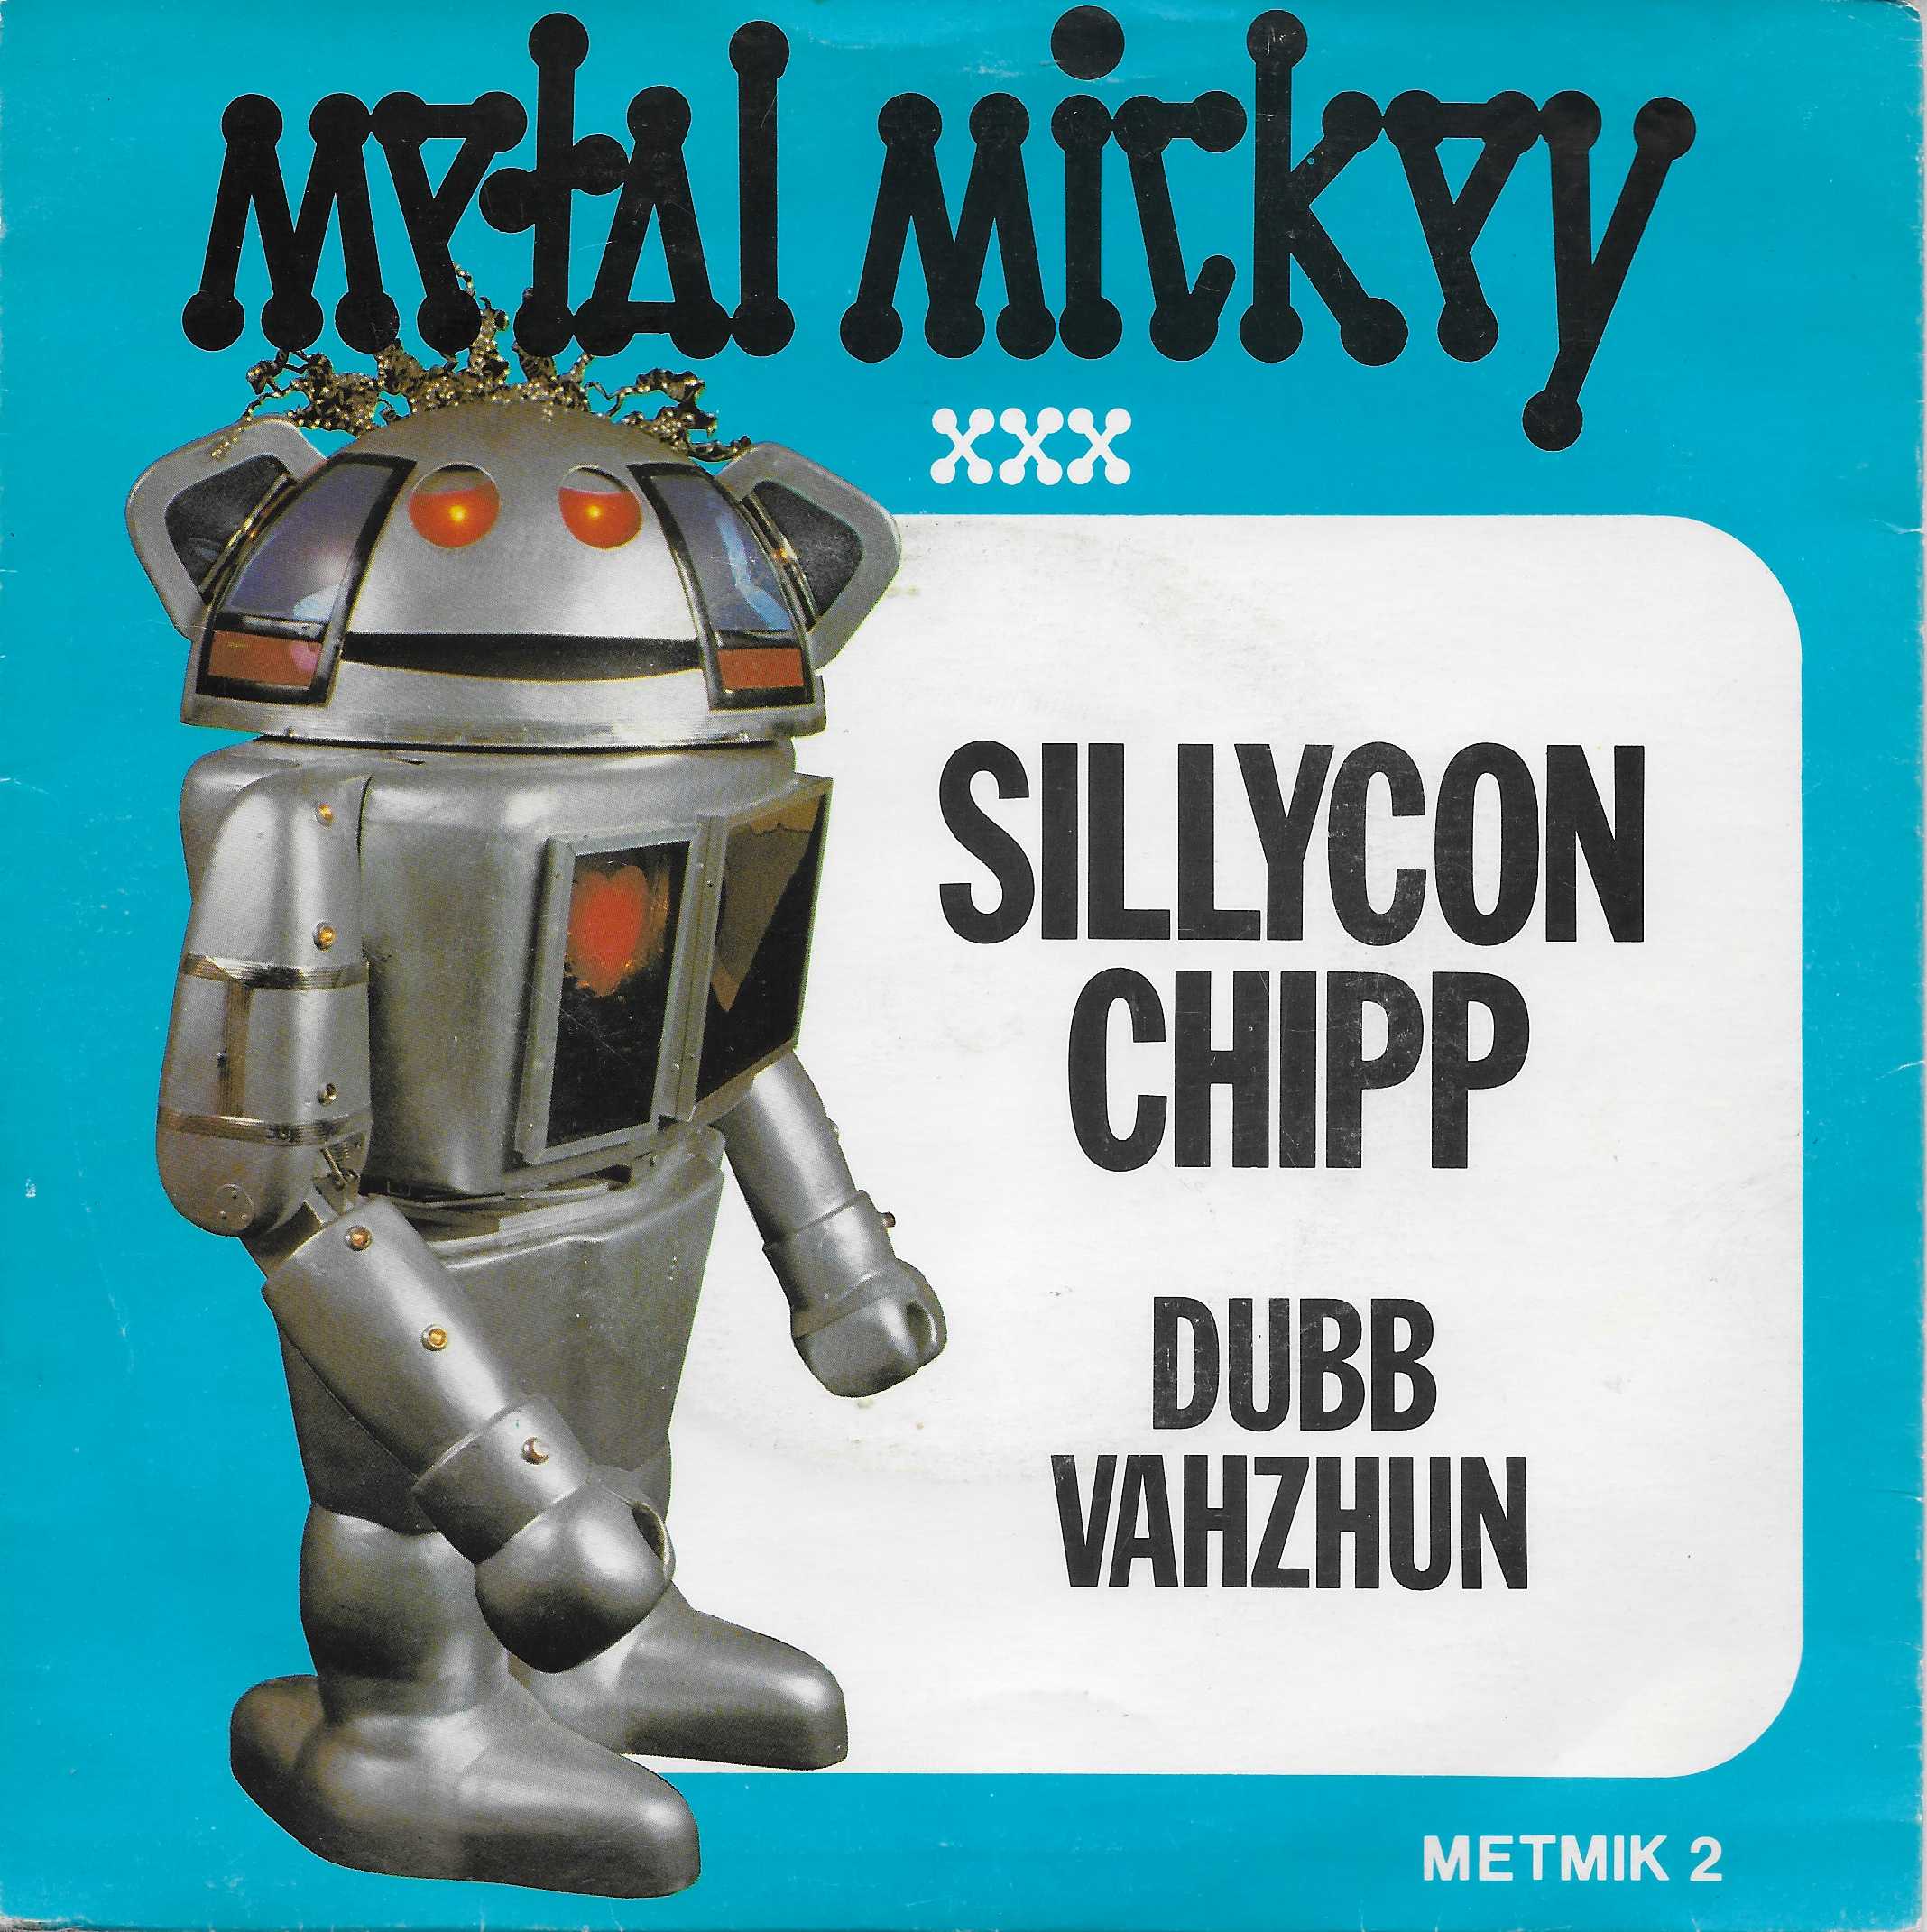 Picture of METMIK 2 Sillycon chipp by artist Metal Mickey from ITV, Channel 4 and Channel 5 library